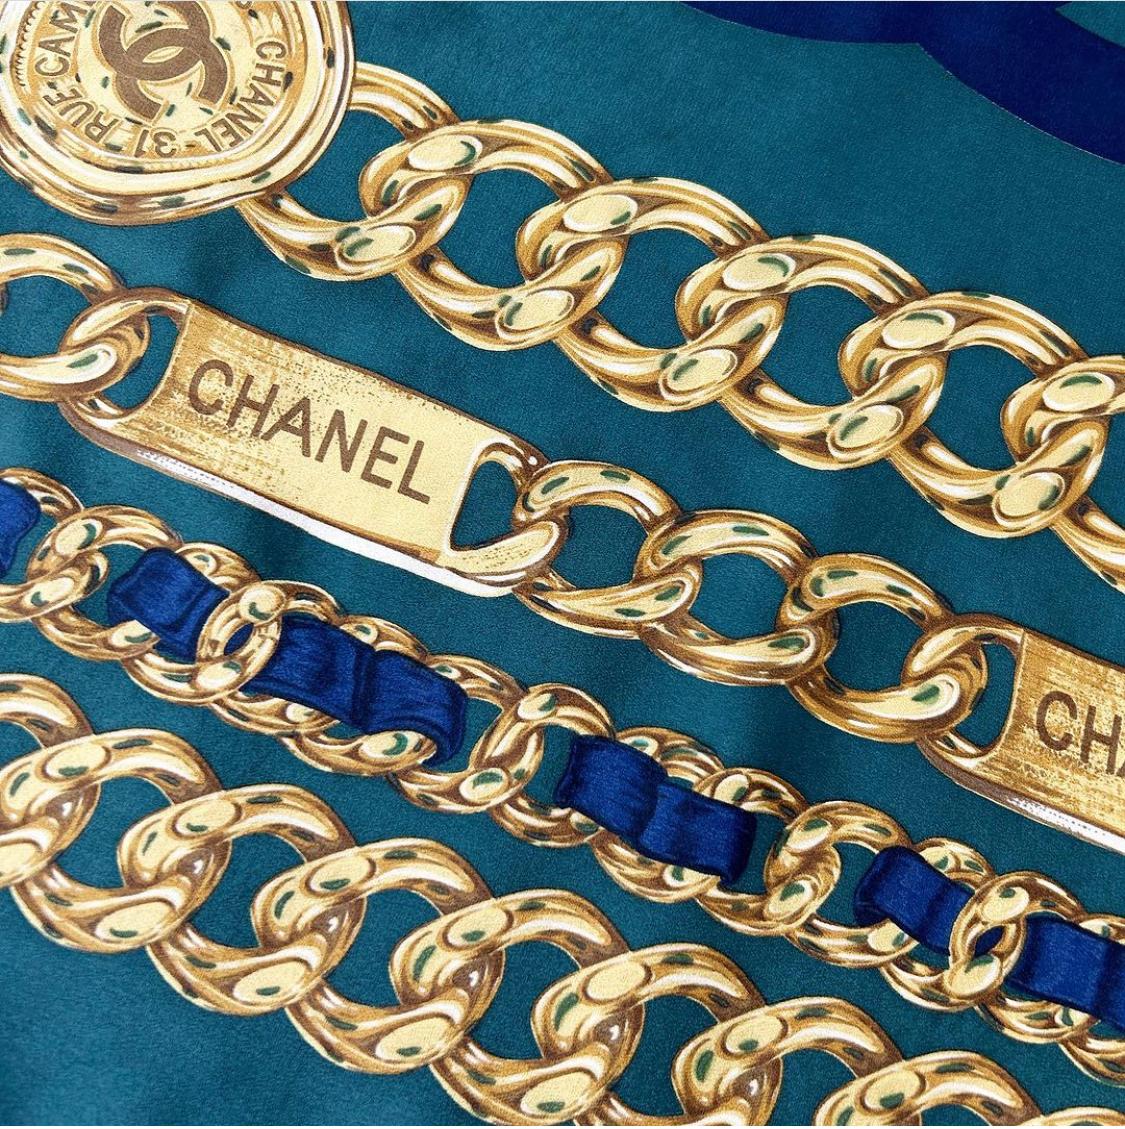 This vintage Chanel scarf is crafted of 100% silk in emerald green featuring iconic Chanel gold chain links and a navy CC at the center with hand-sewn rolled edges. Measures 34 x 33 inches. Made in Italy. 

Condition: Excellent vintage condition